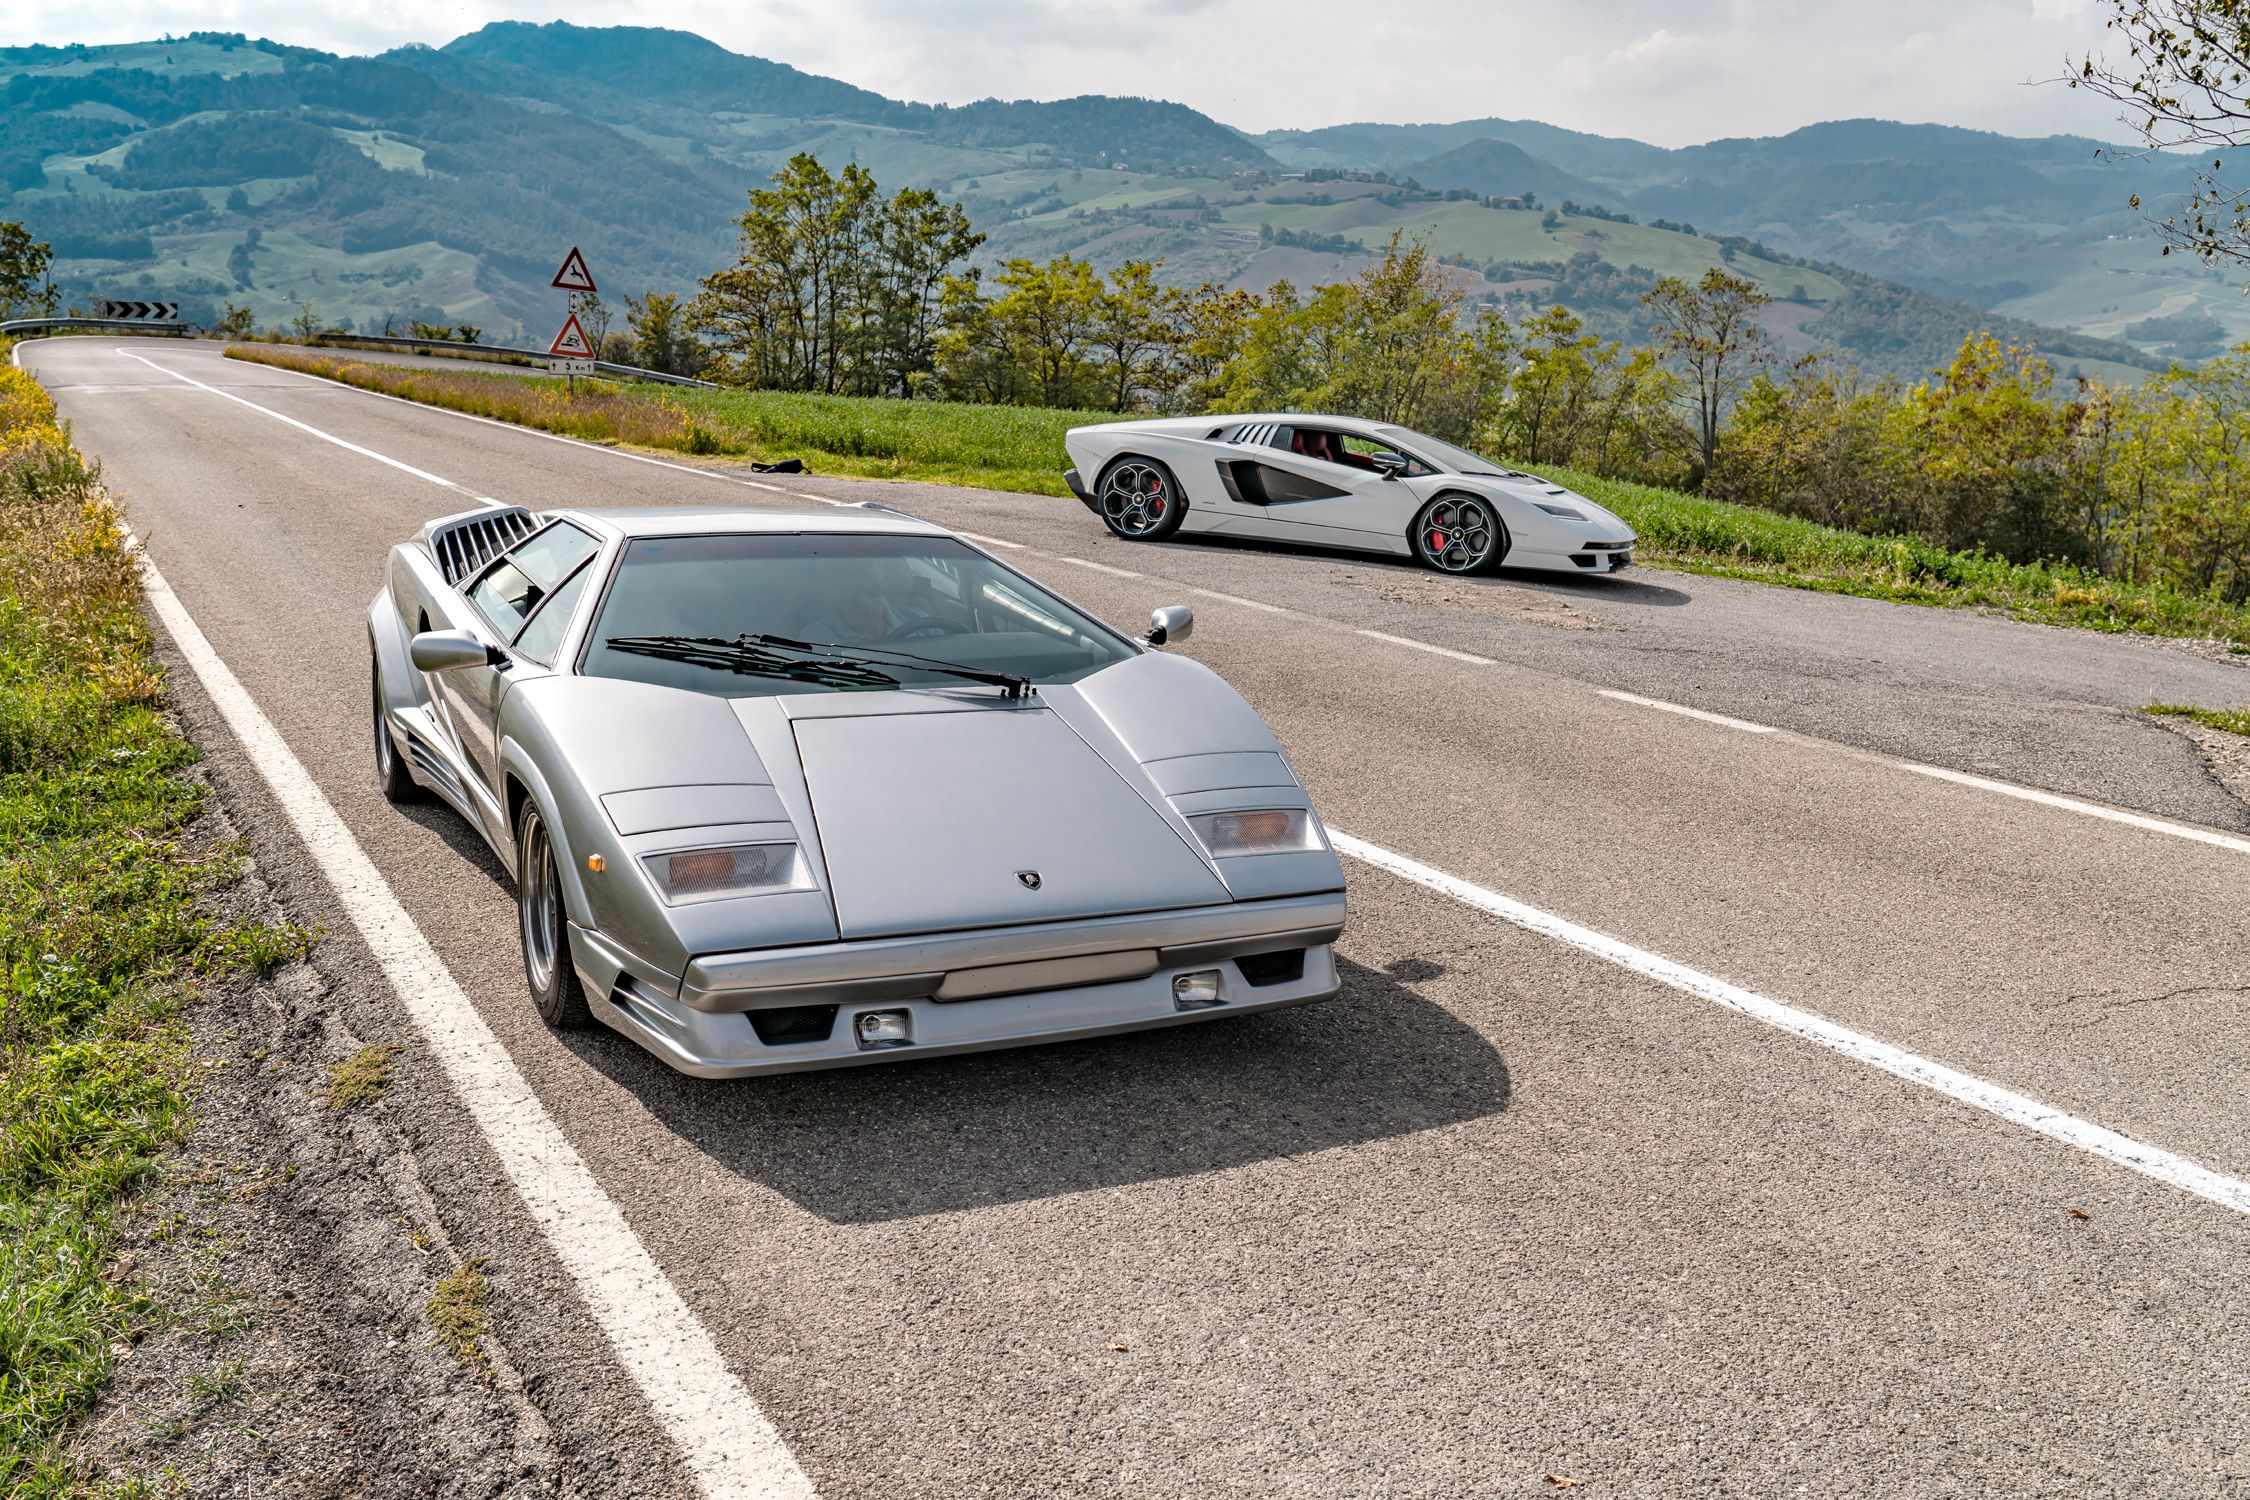 1979 Lamborghini Countach From The Cannonball Run Is Now a